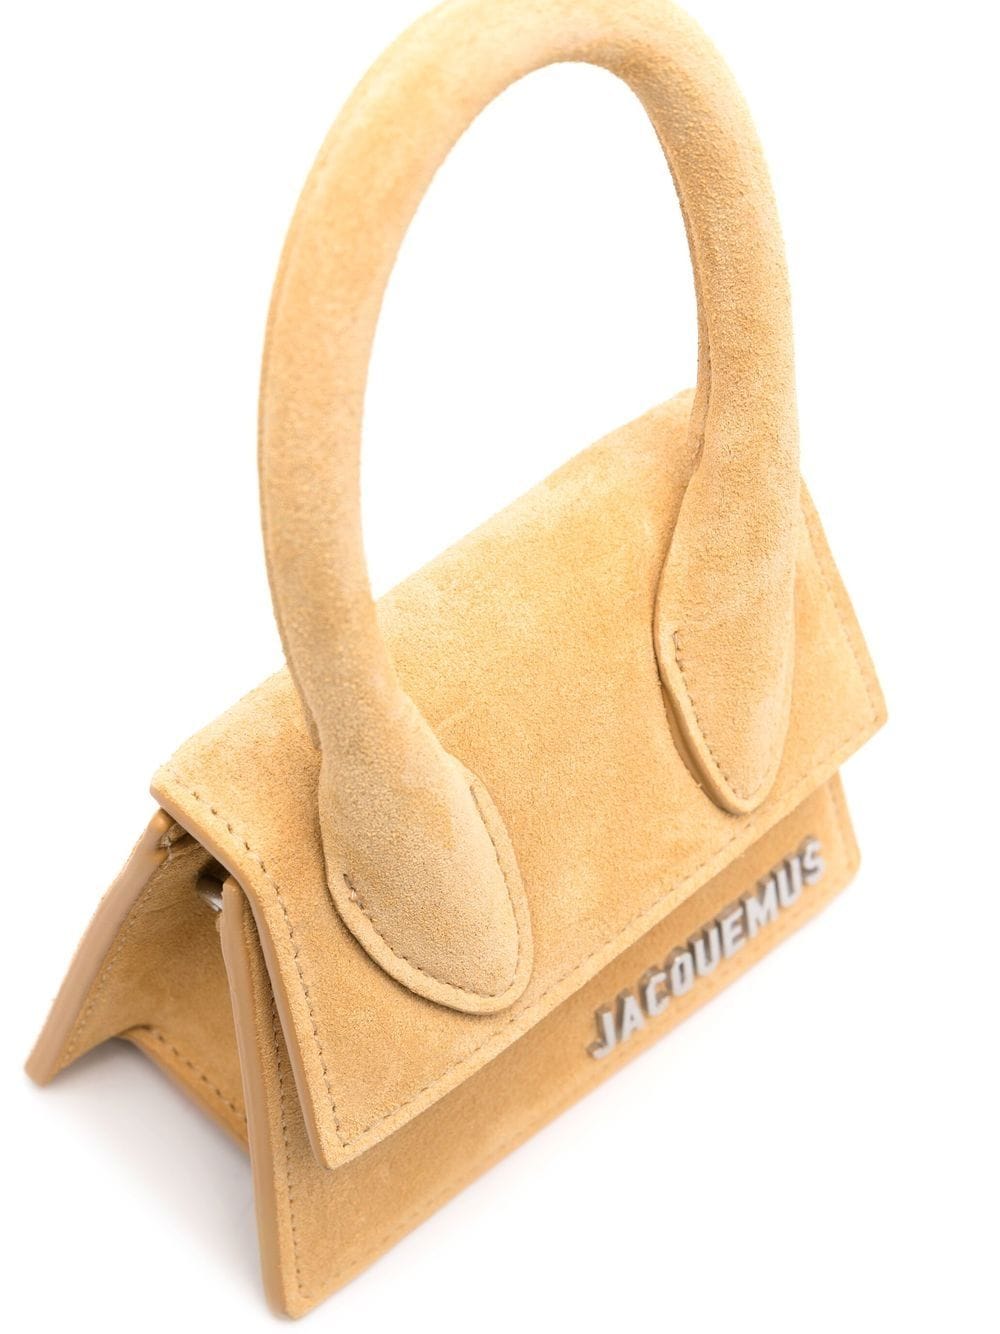 Jacquemus Yellow Suede Le Chiquito Bag